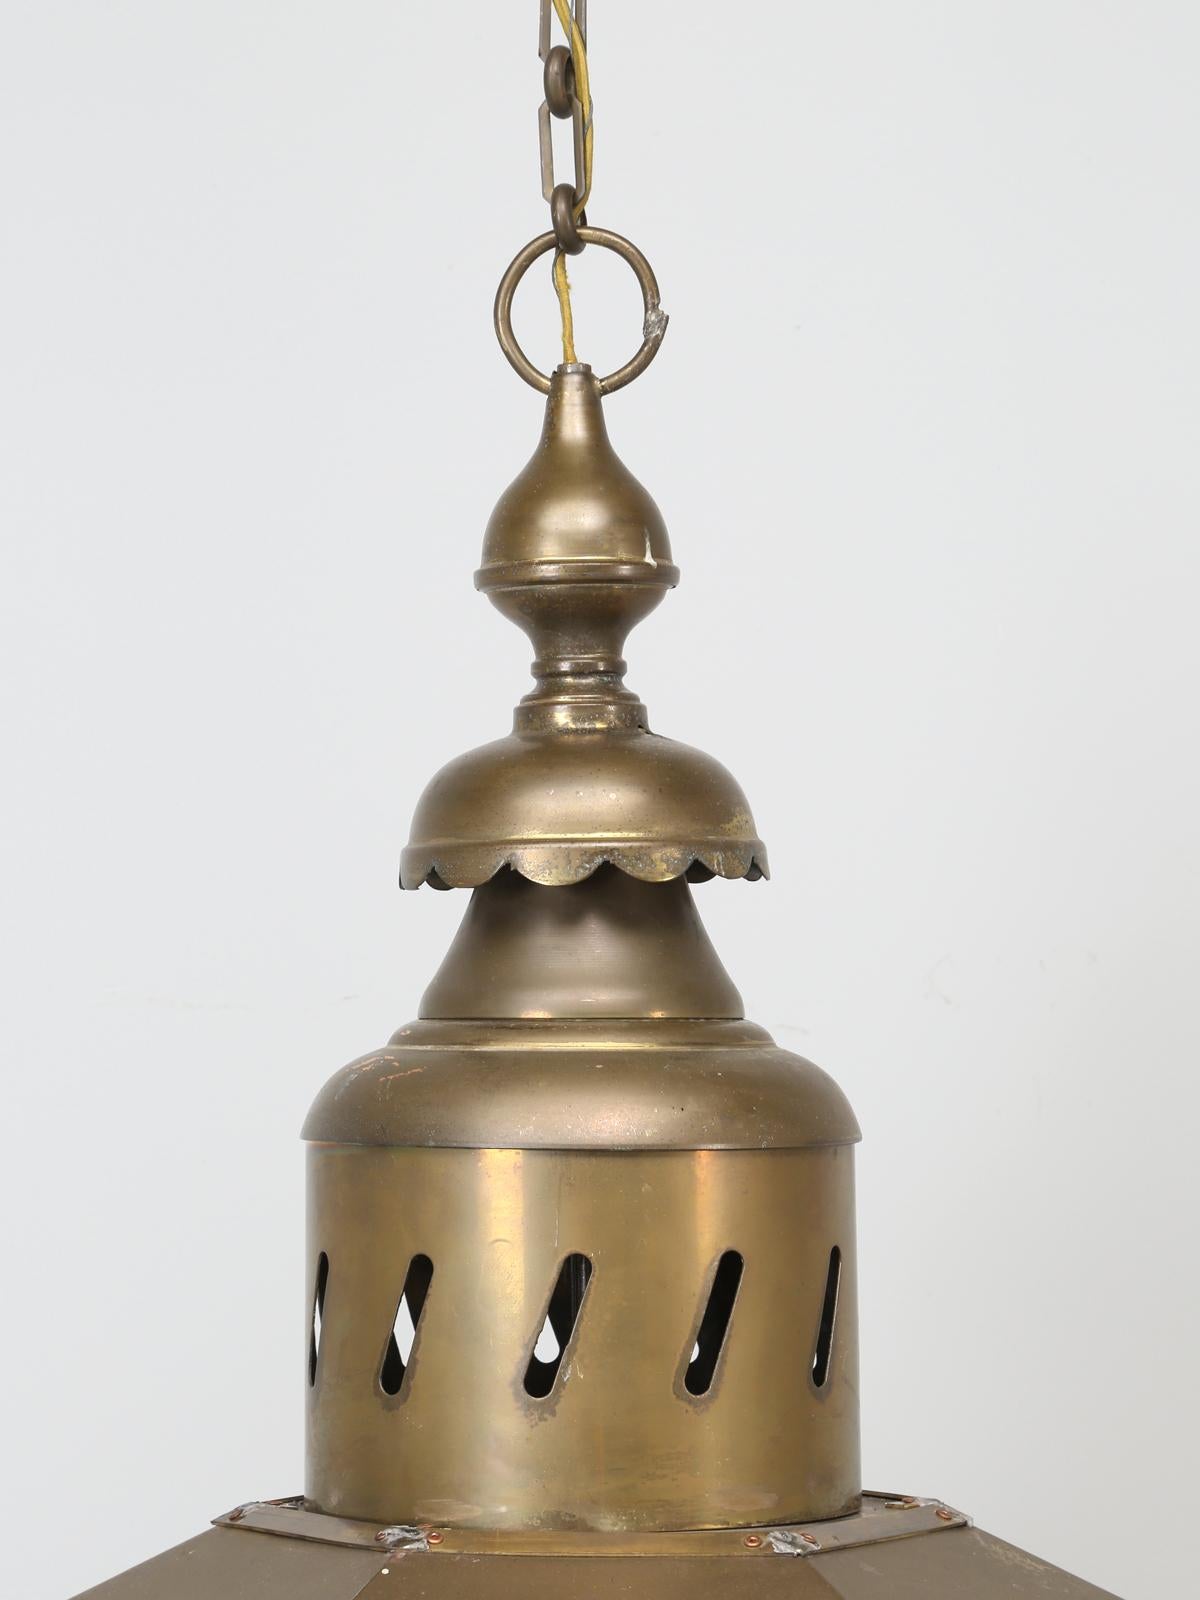 Country Antique Large Brass French or English Lantern, Fully Restored Old Glass For Sale